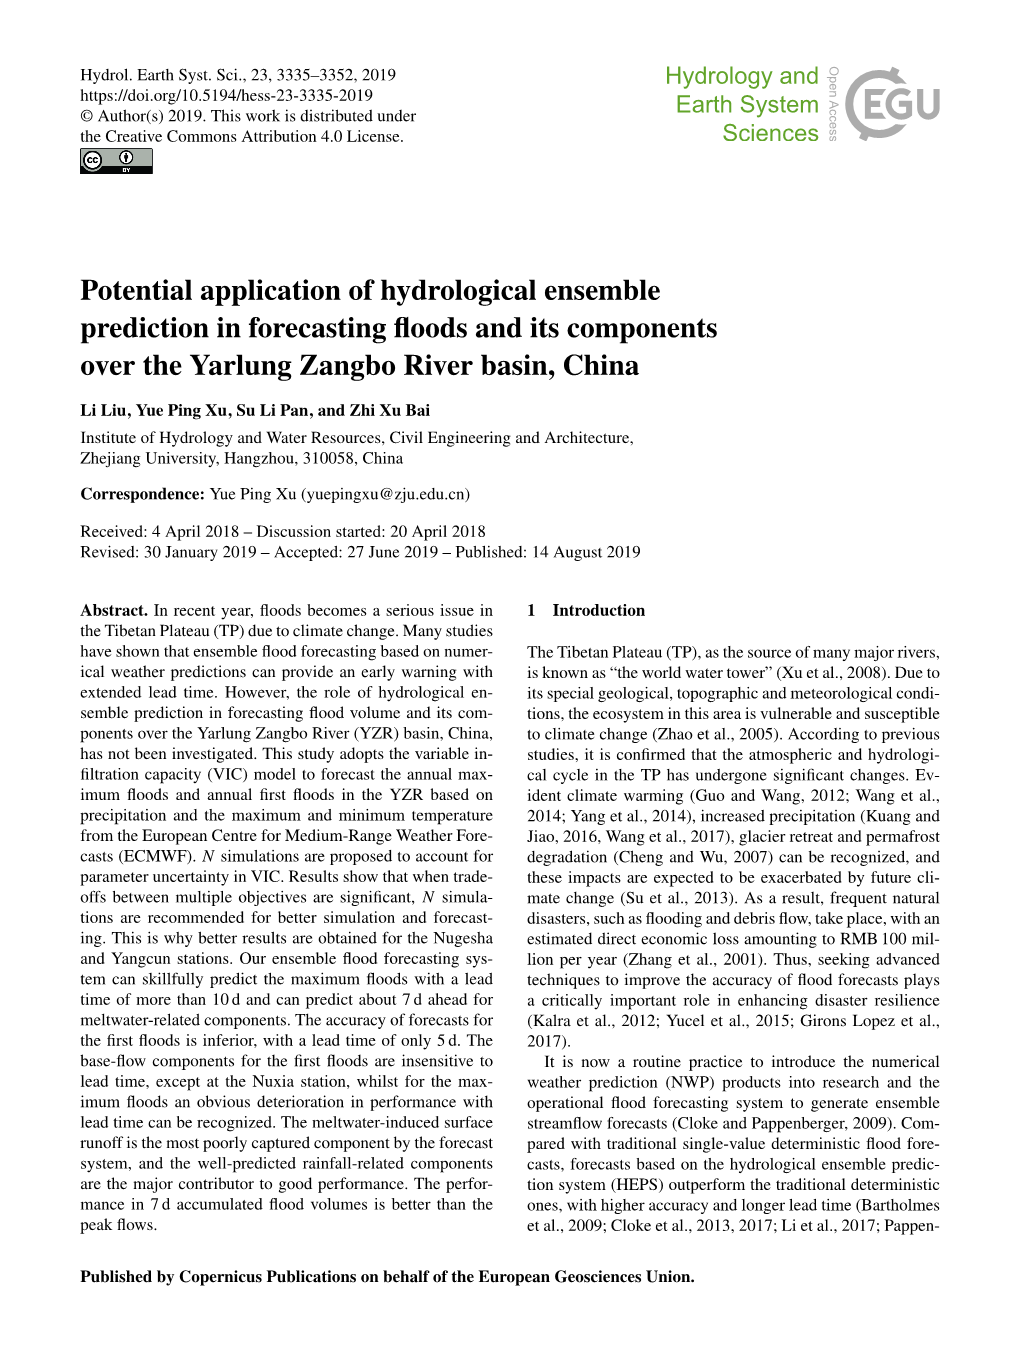 Potential Application of Hydrological Ensemble Prediction in Forecasting ﬂoods and Its Components Over the Yarlung Zangbo River Basin, China